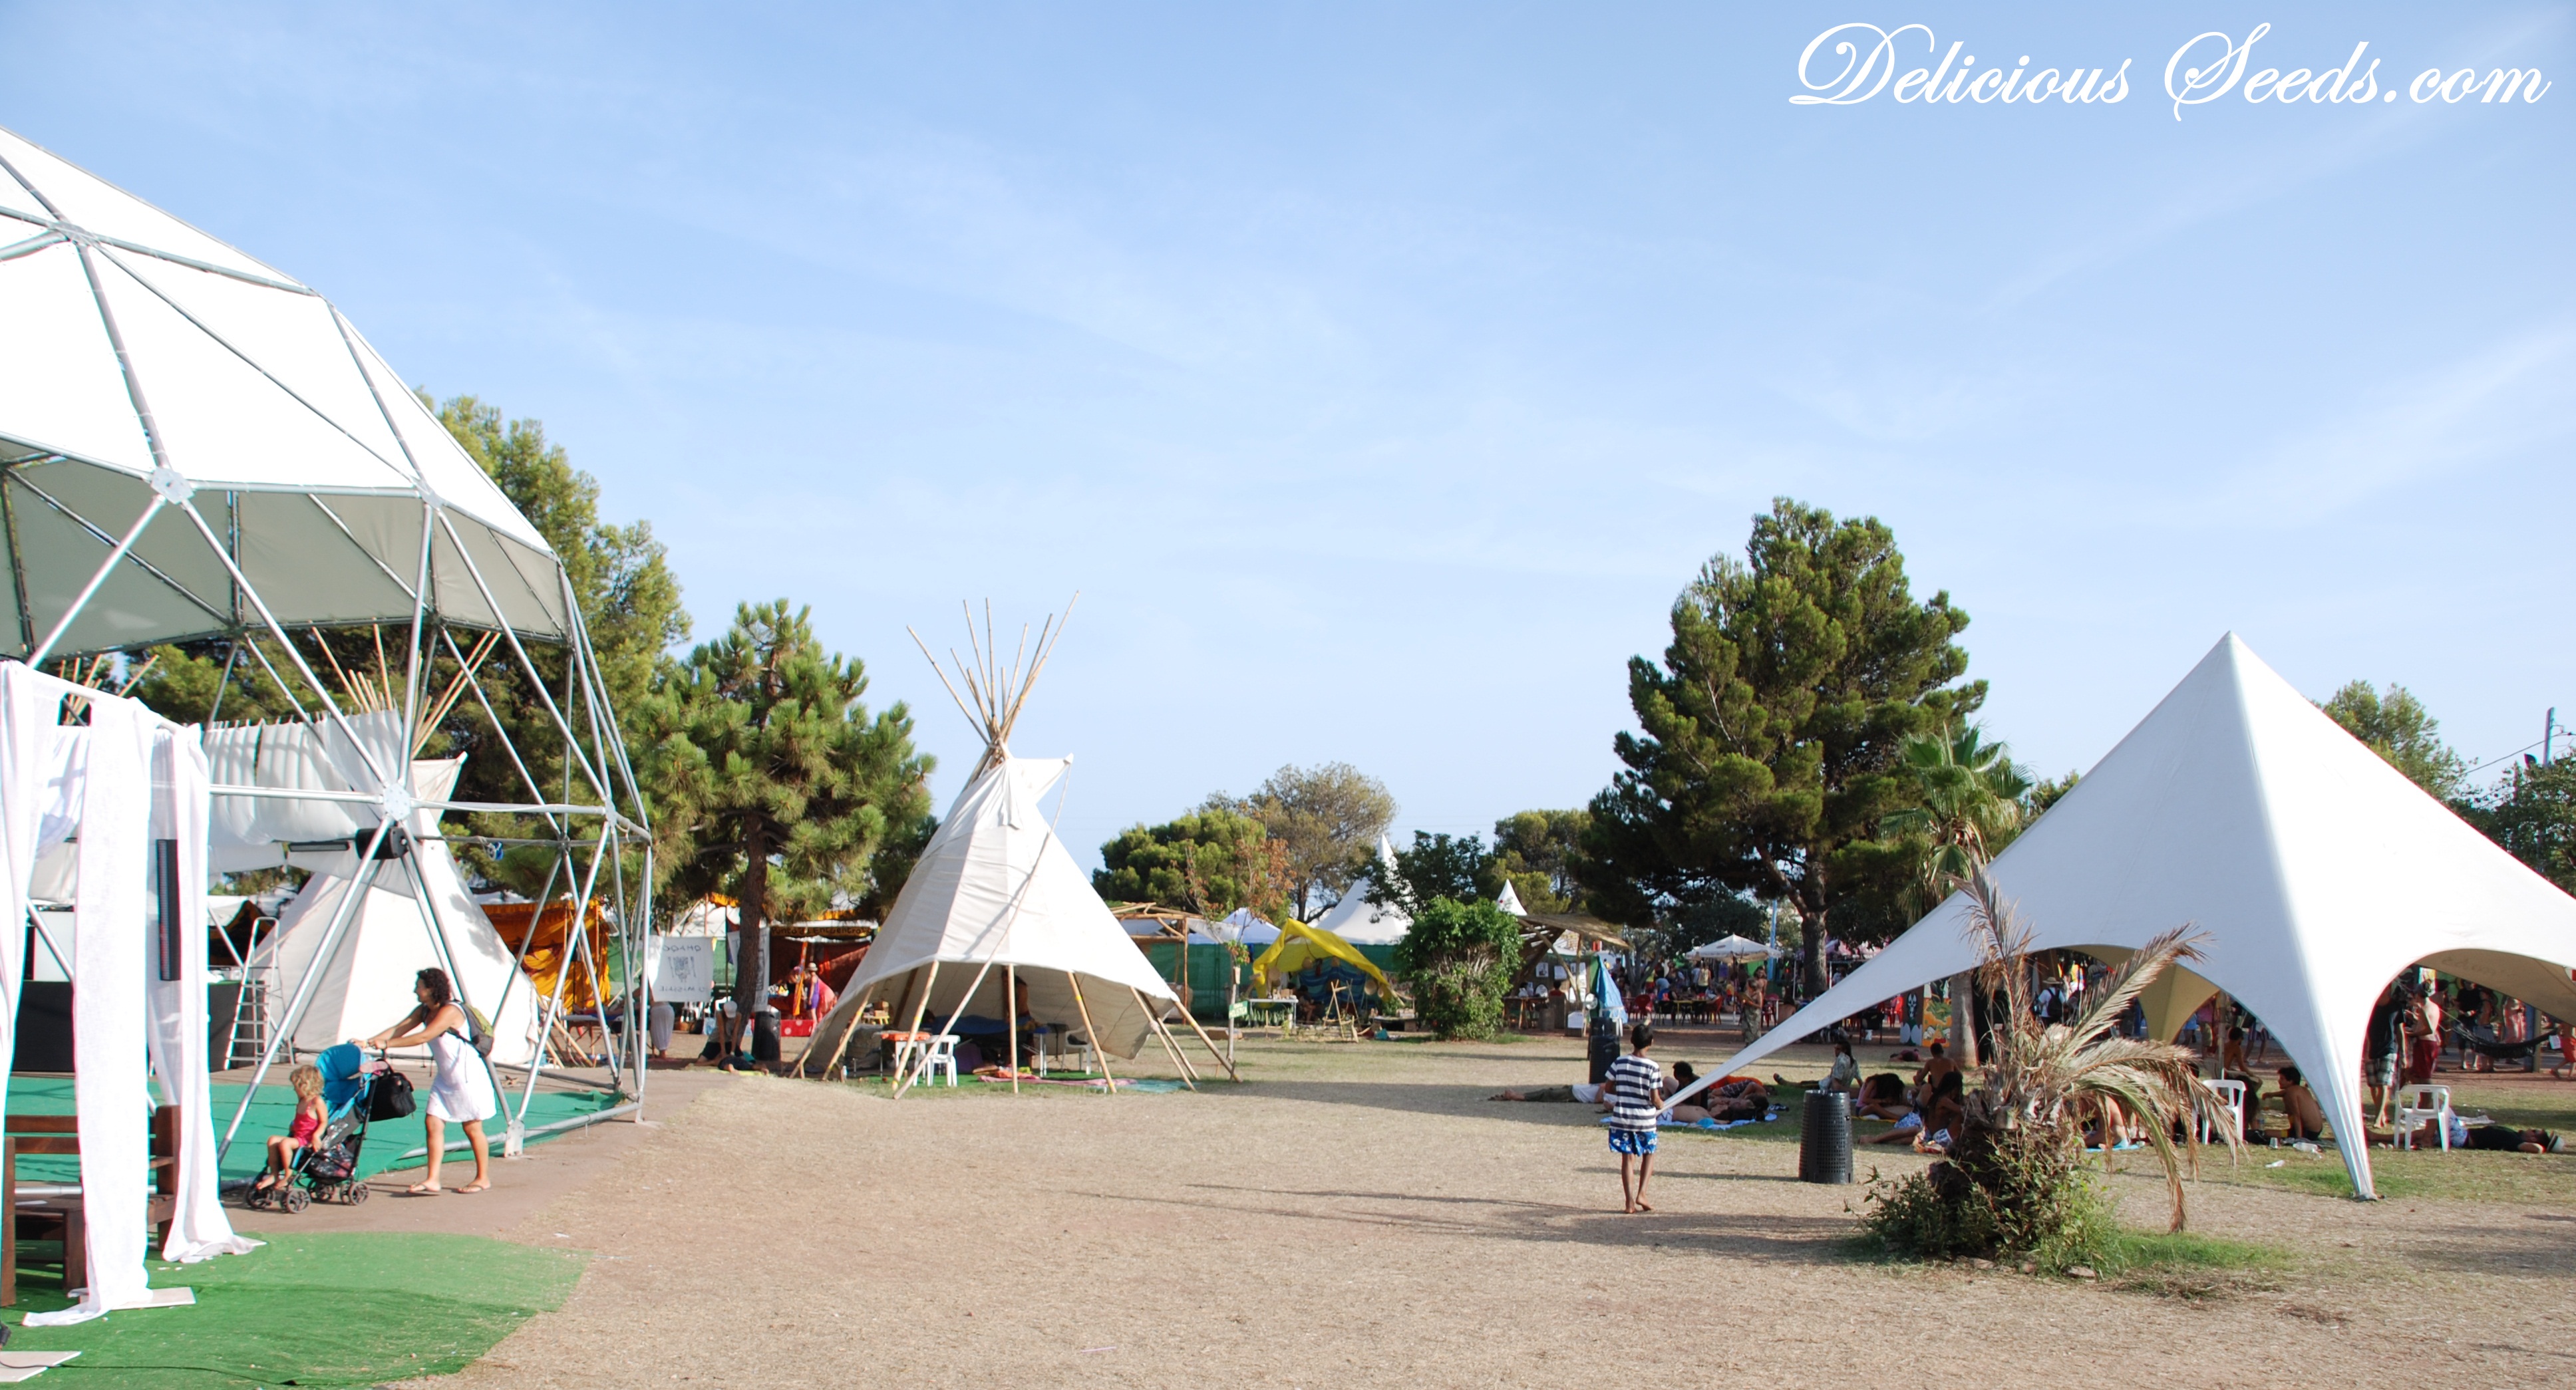 Vivir la Energía (Living the Energy), a part of the Rototom site in Benicassim